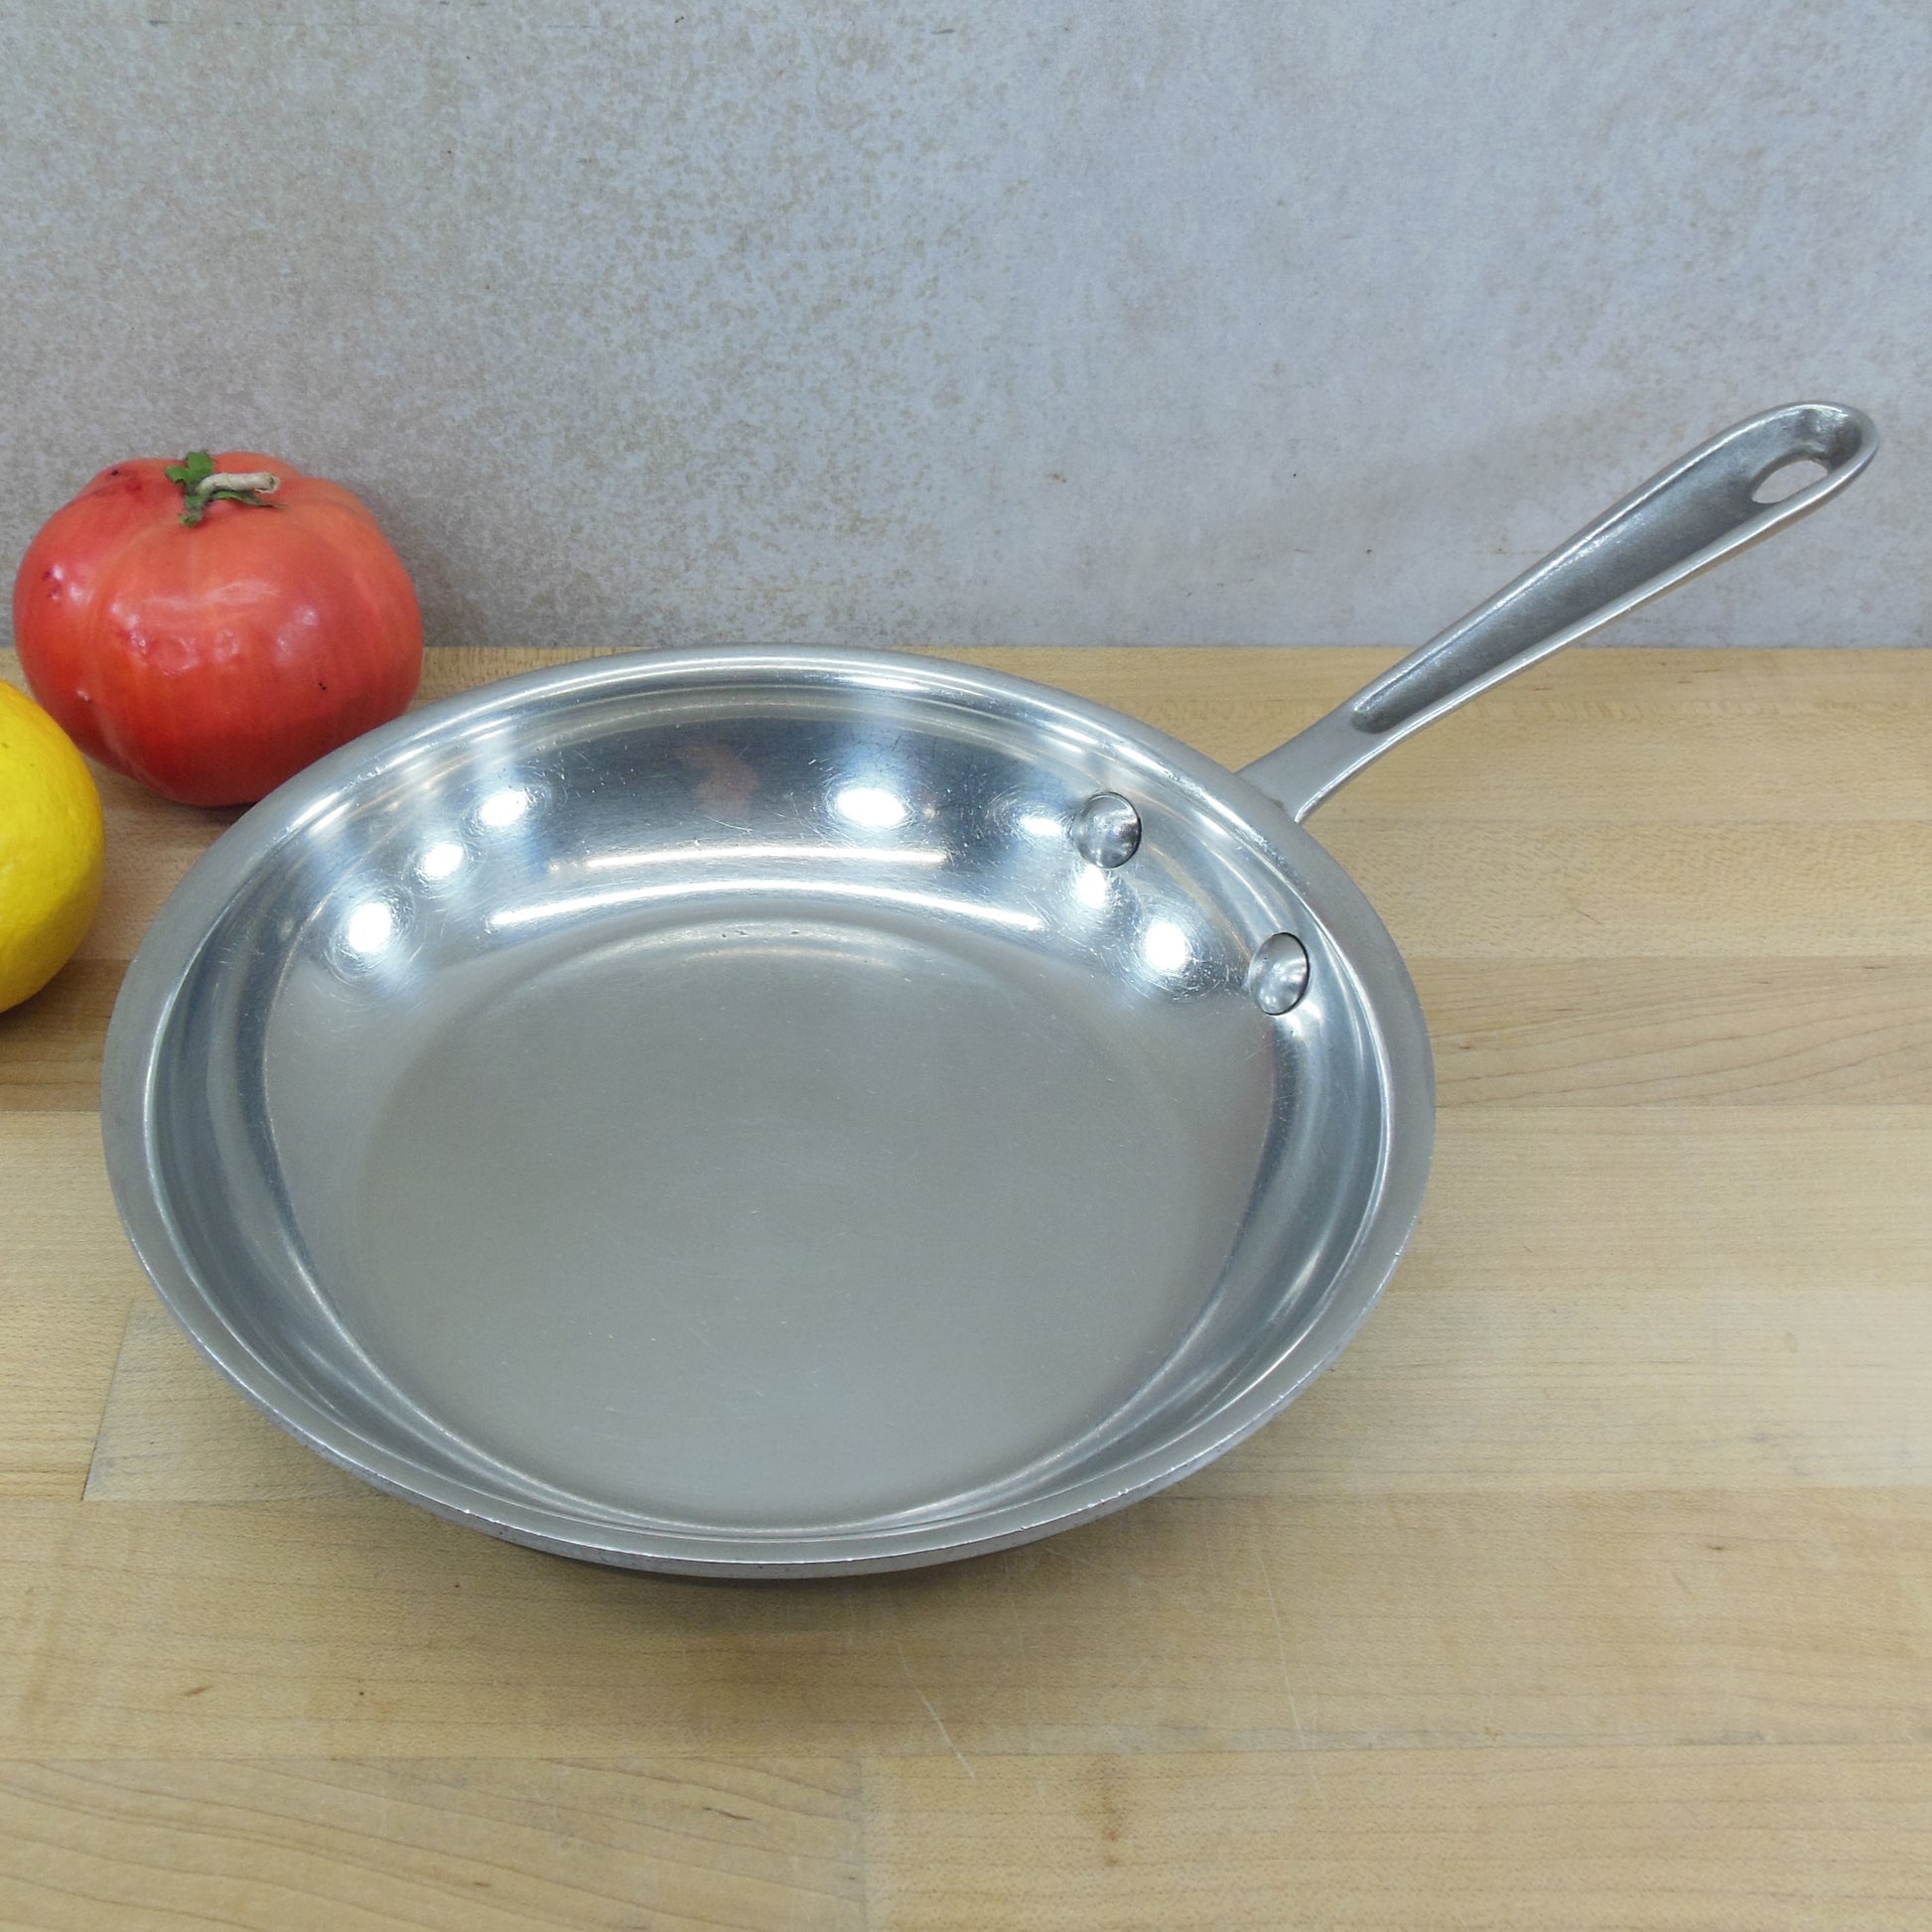 All-Clad Ltd Stainless Anodized 8.5" Fry Pan Skillet - Discounted